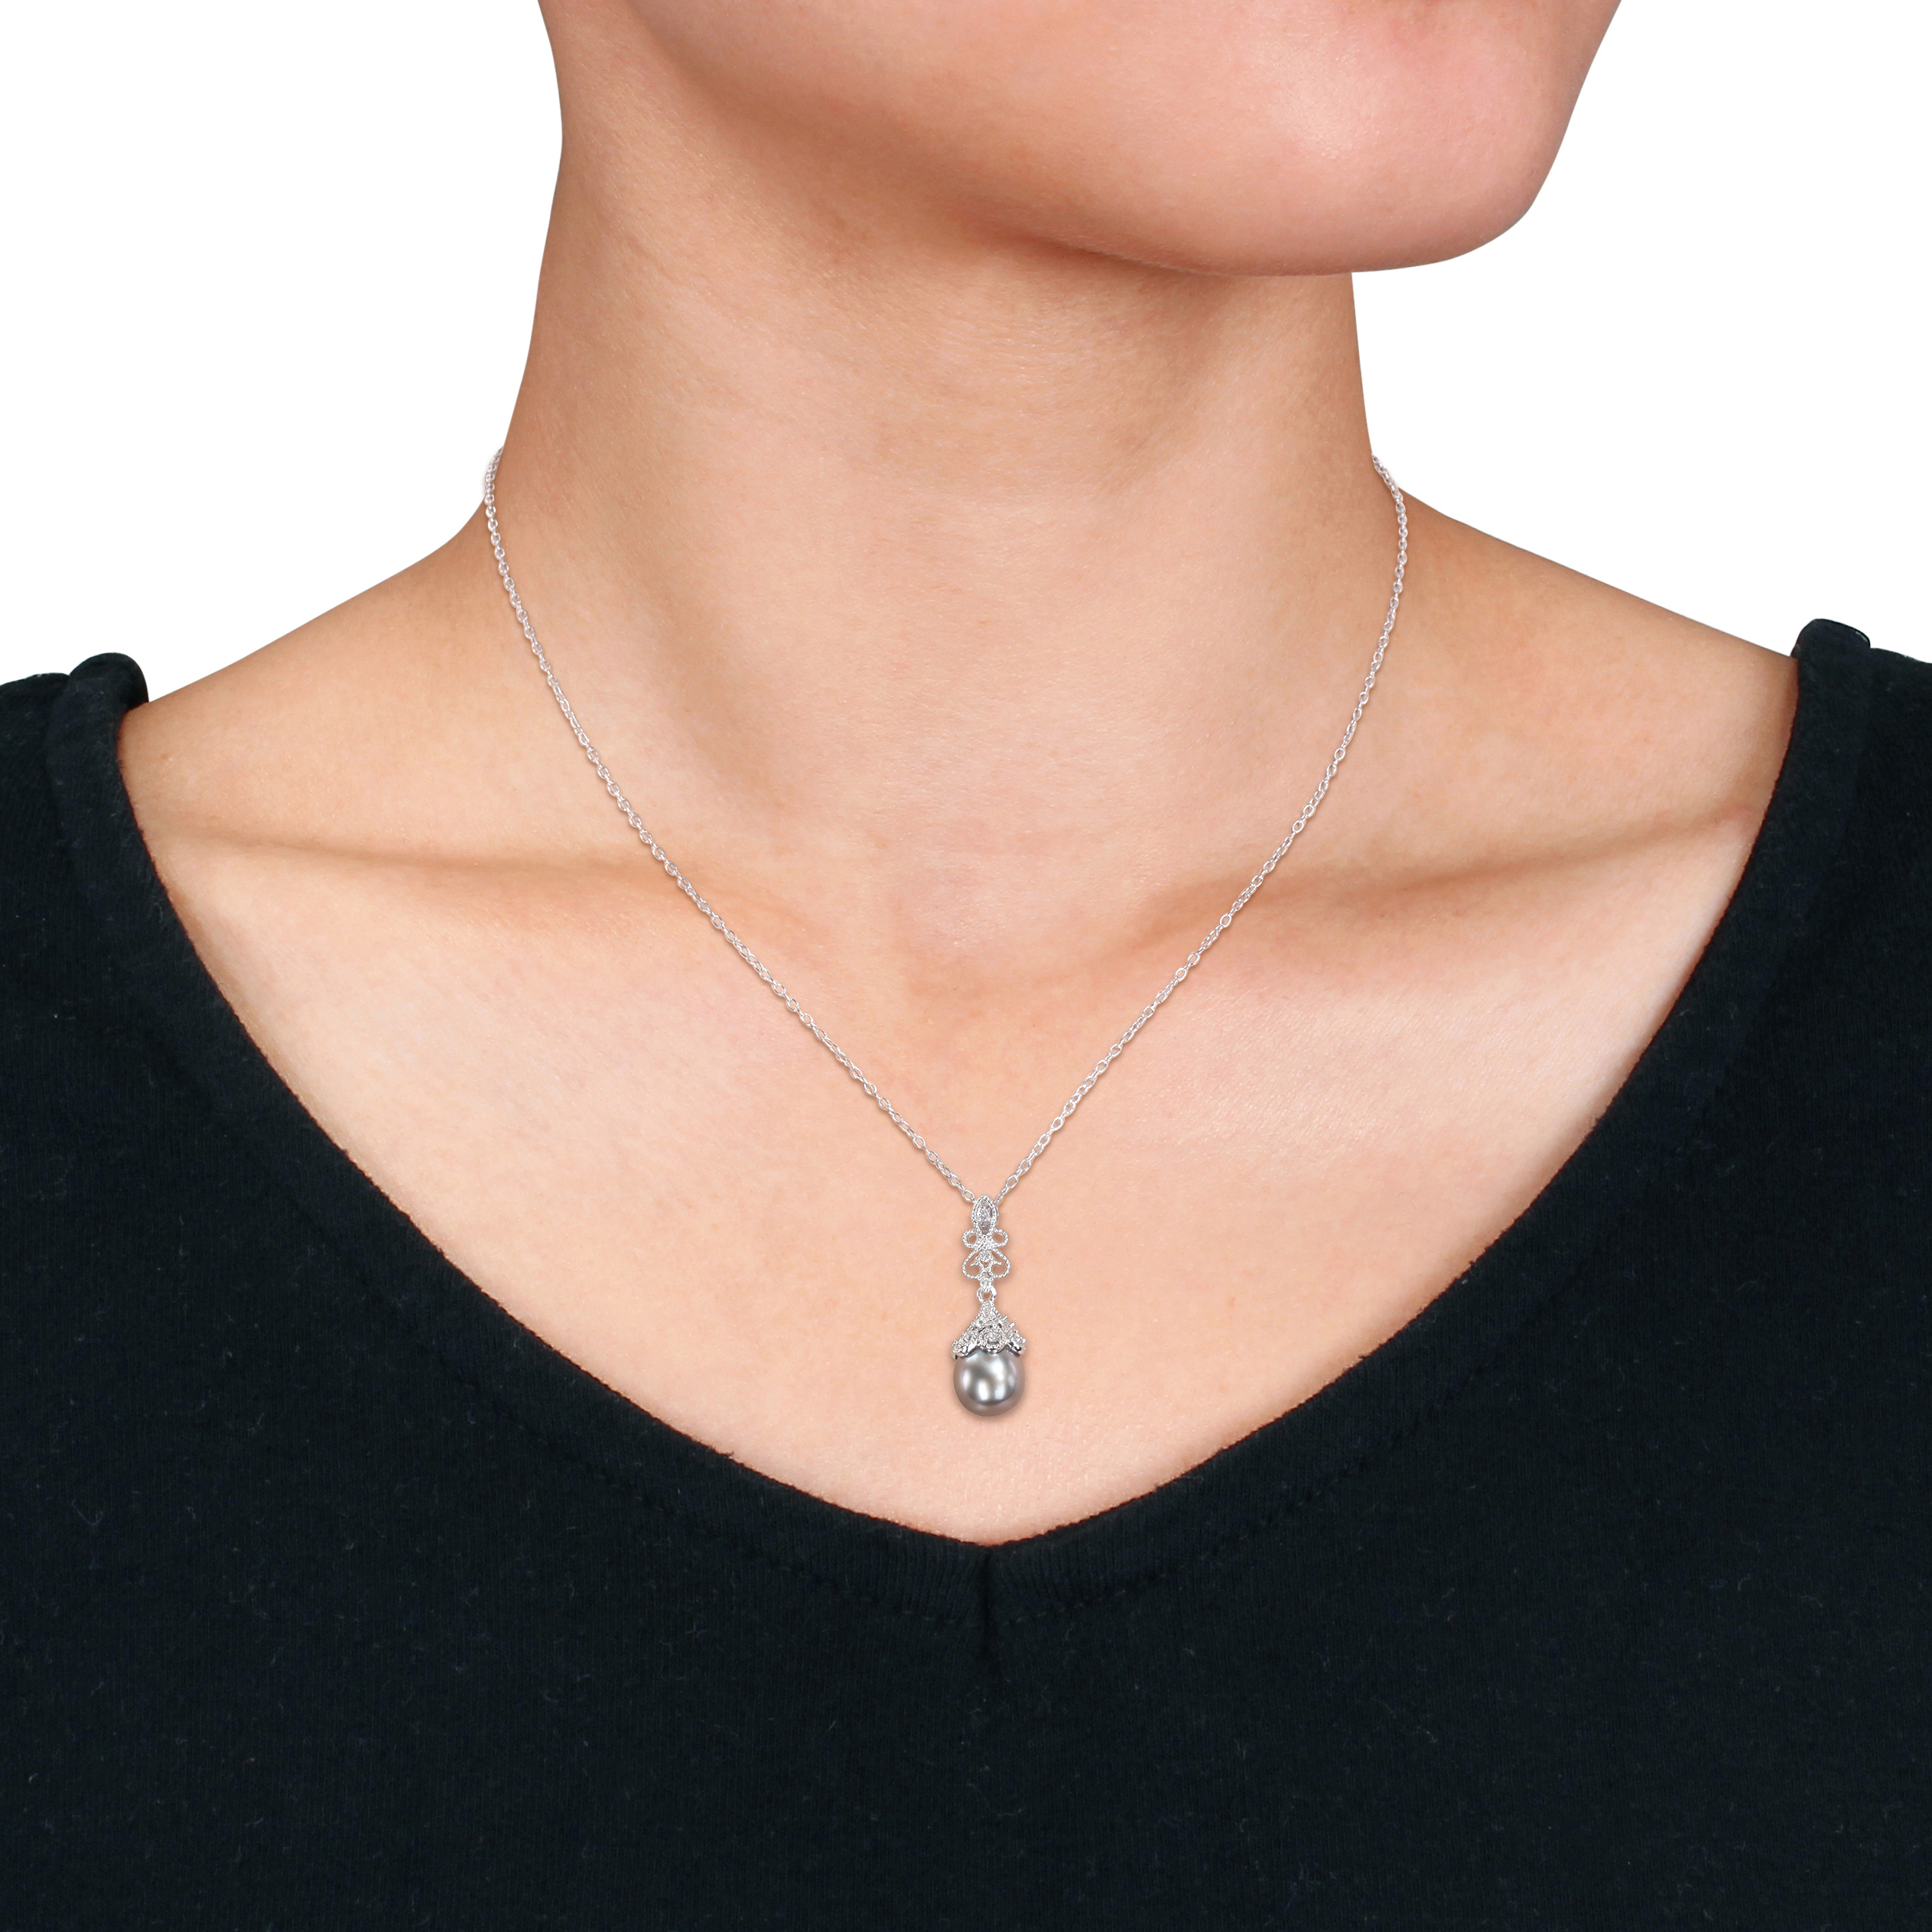 8-8.5MM Black Tahitian Cultured Pearl and 1/8CT TGW White Topaz Drop Pendant in Sterling Silver - 18 in.